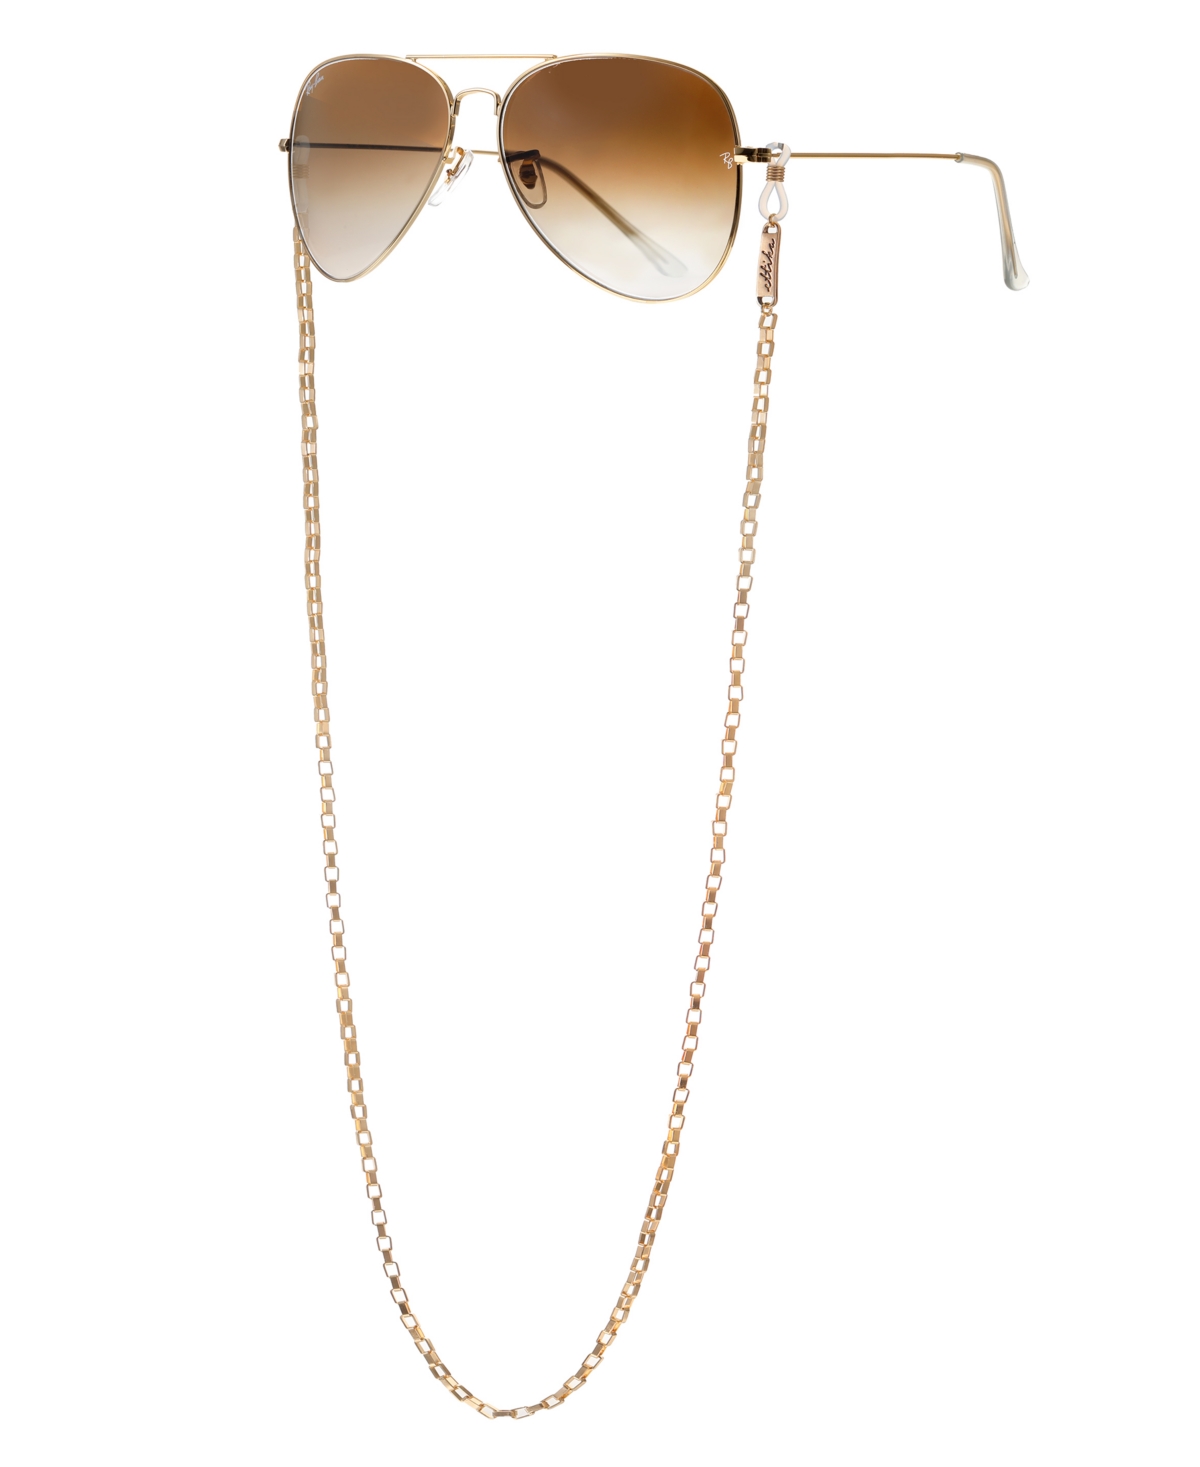 Women's 18k Gold Plated Golden Rays Rectangle Glasses Chain Necklace - Gold-Plated